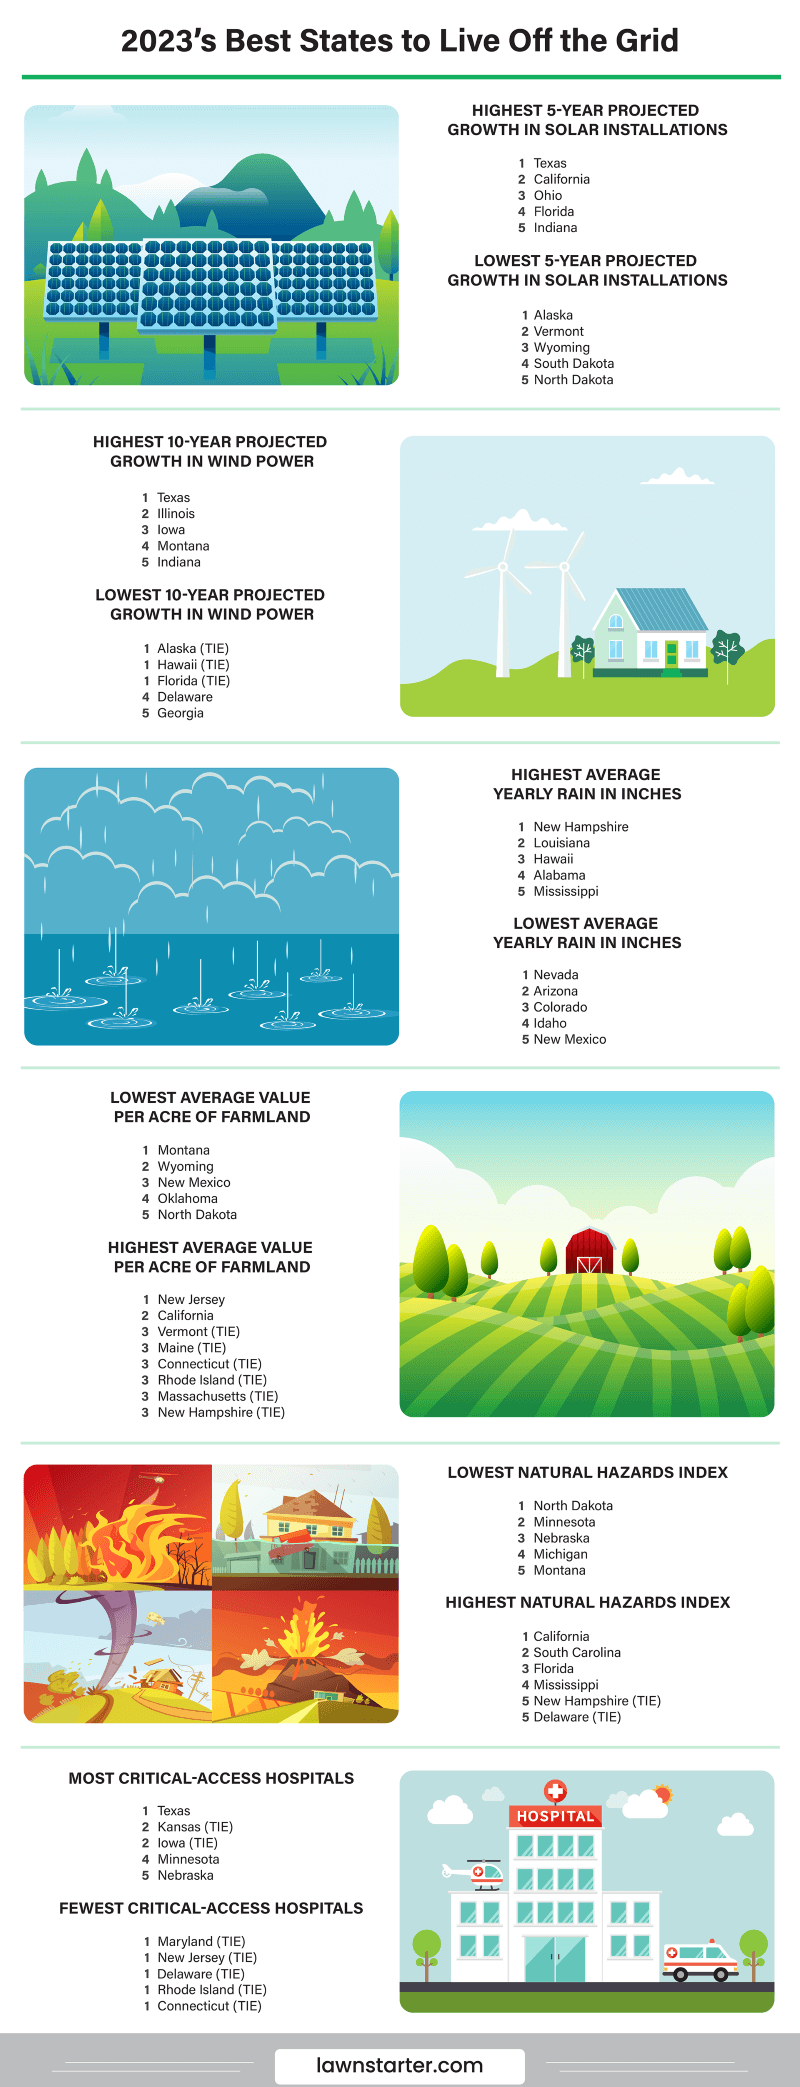 Infographic showing the best states to live off the grid, a ranking based on off-grid laws, population density, availability of renewable energy, and more